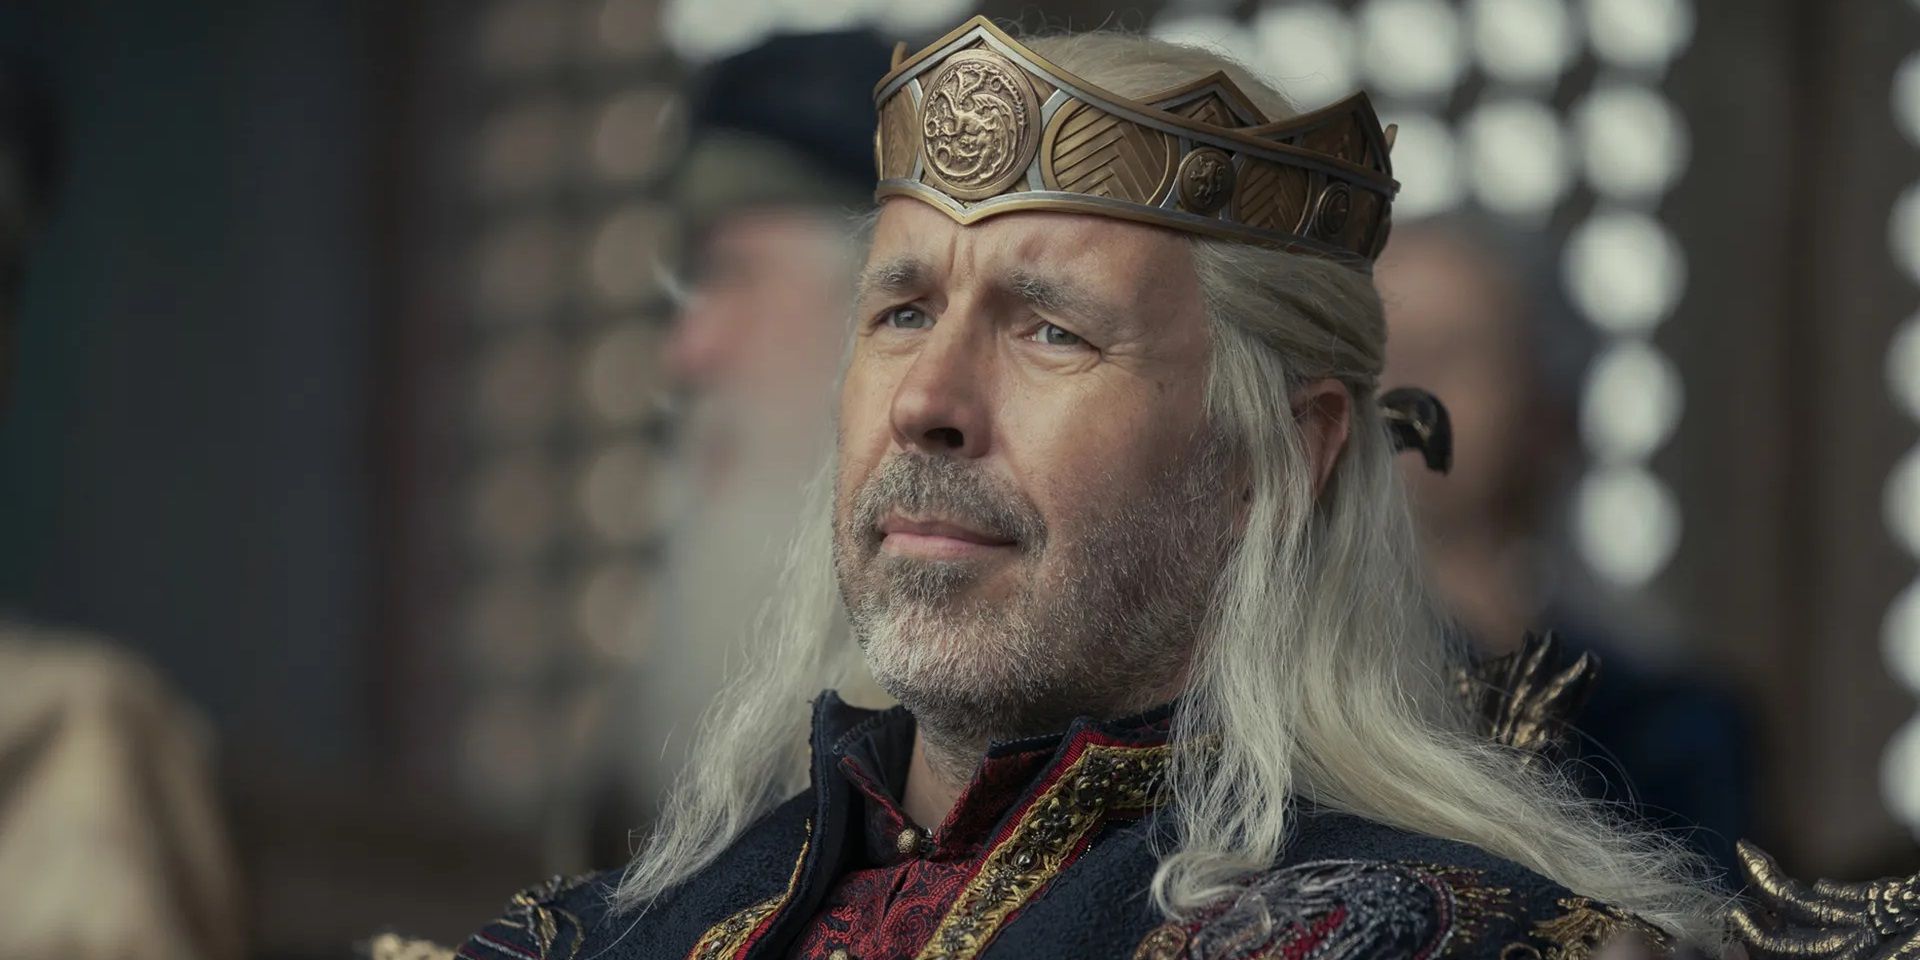 King Viserys watches a jousting match in House of the Dragon